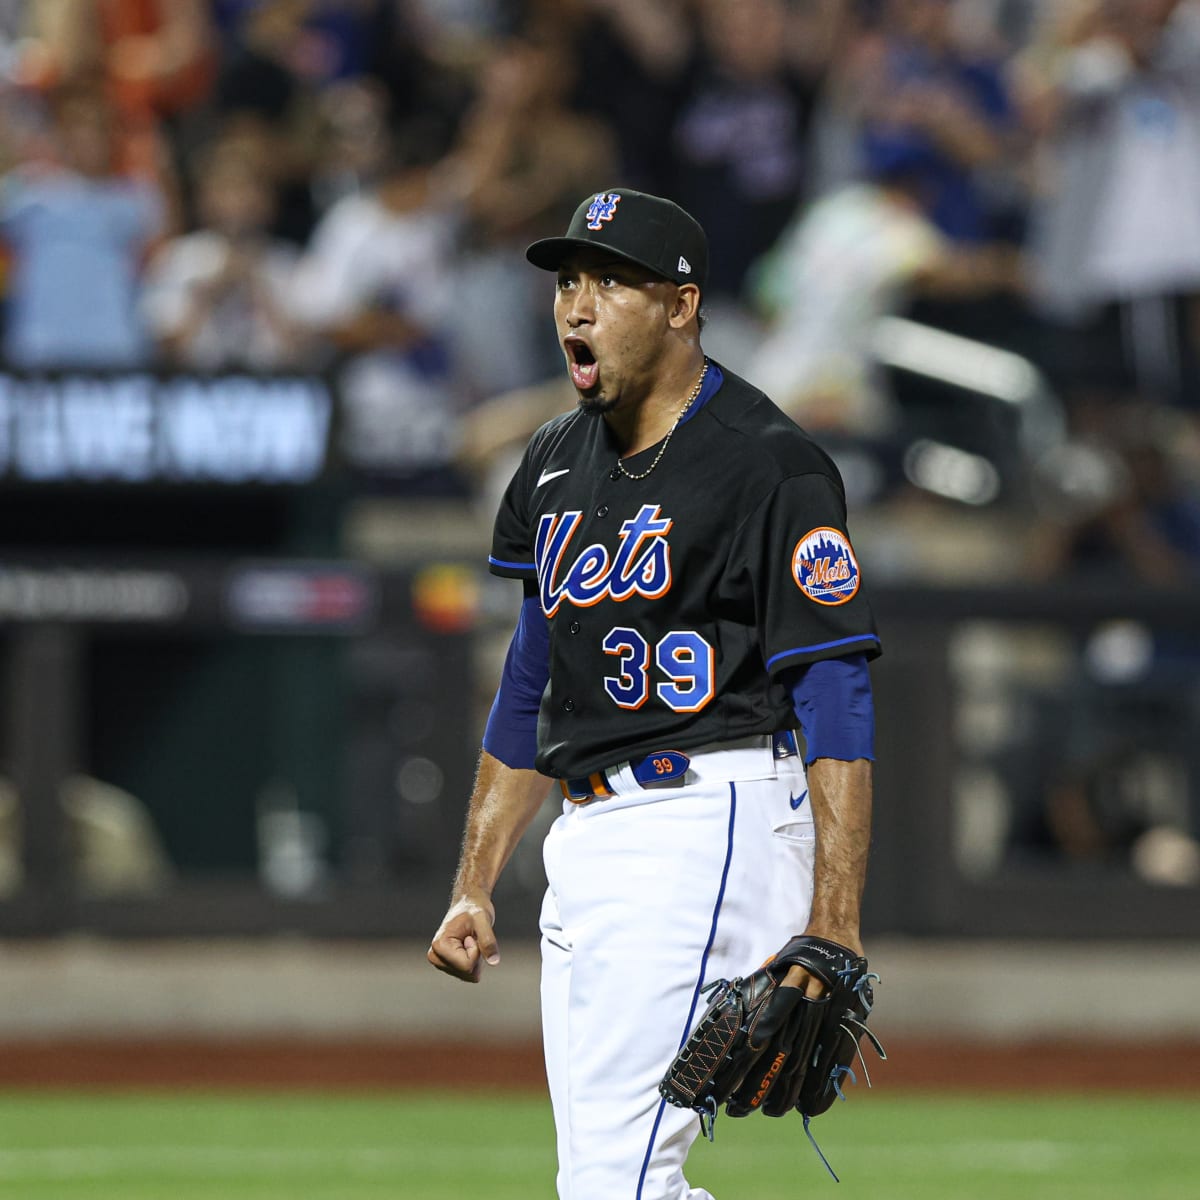 New York Mets closer Edwin Diaz's walk-out to the field is electric